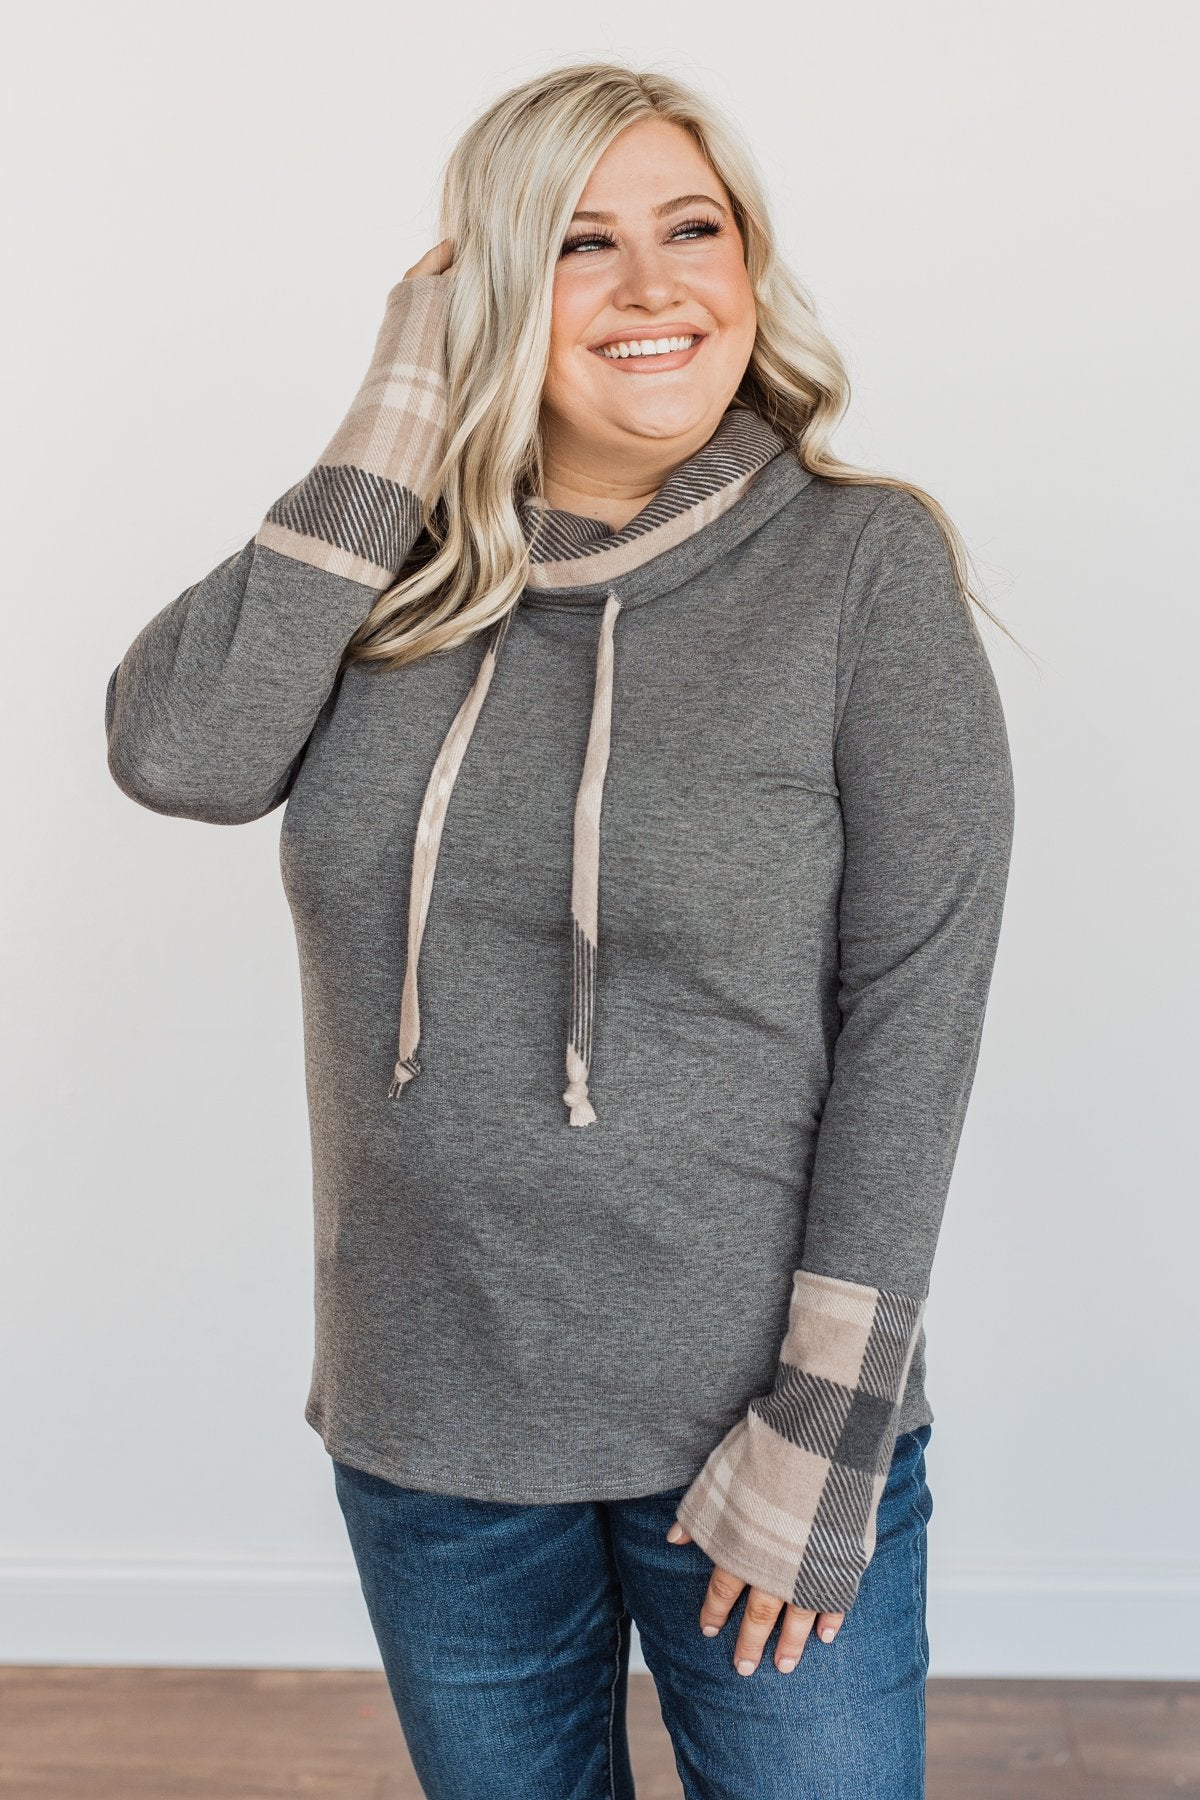 Celebrate The Season Cowl Neck Top- Charcoal & Taupe